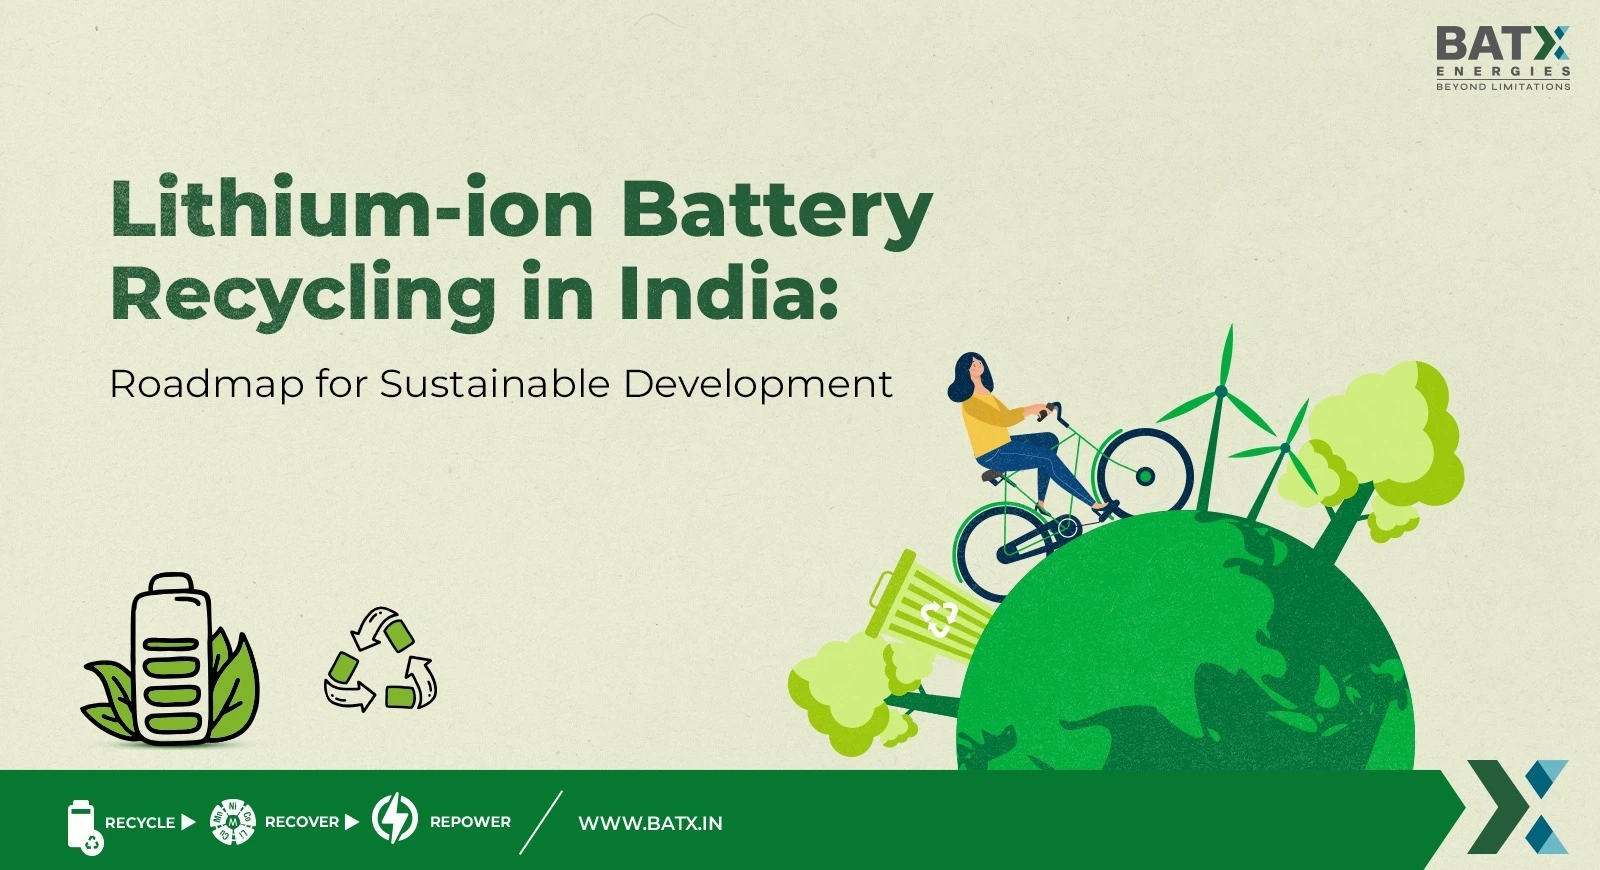 Lithium-ion Battery Recycling in India: Roadmap for Sustainable Development